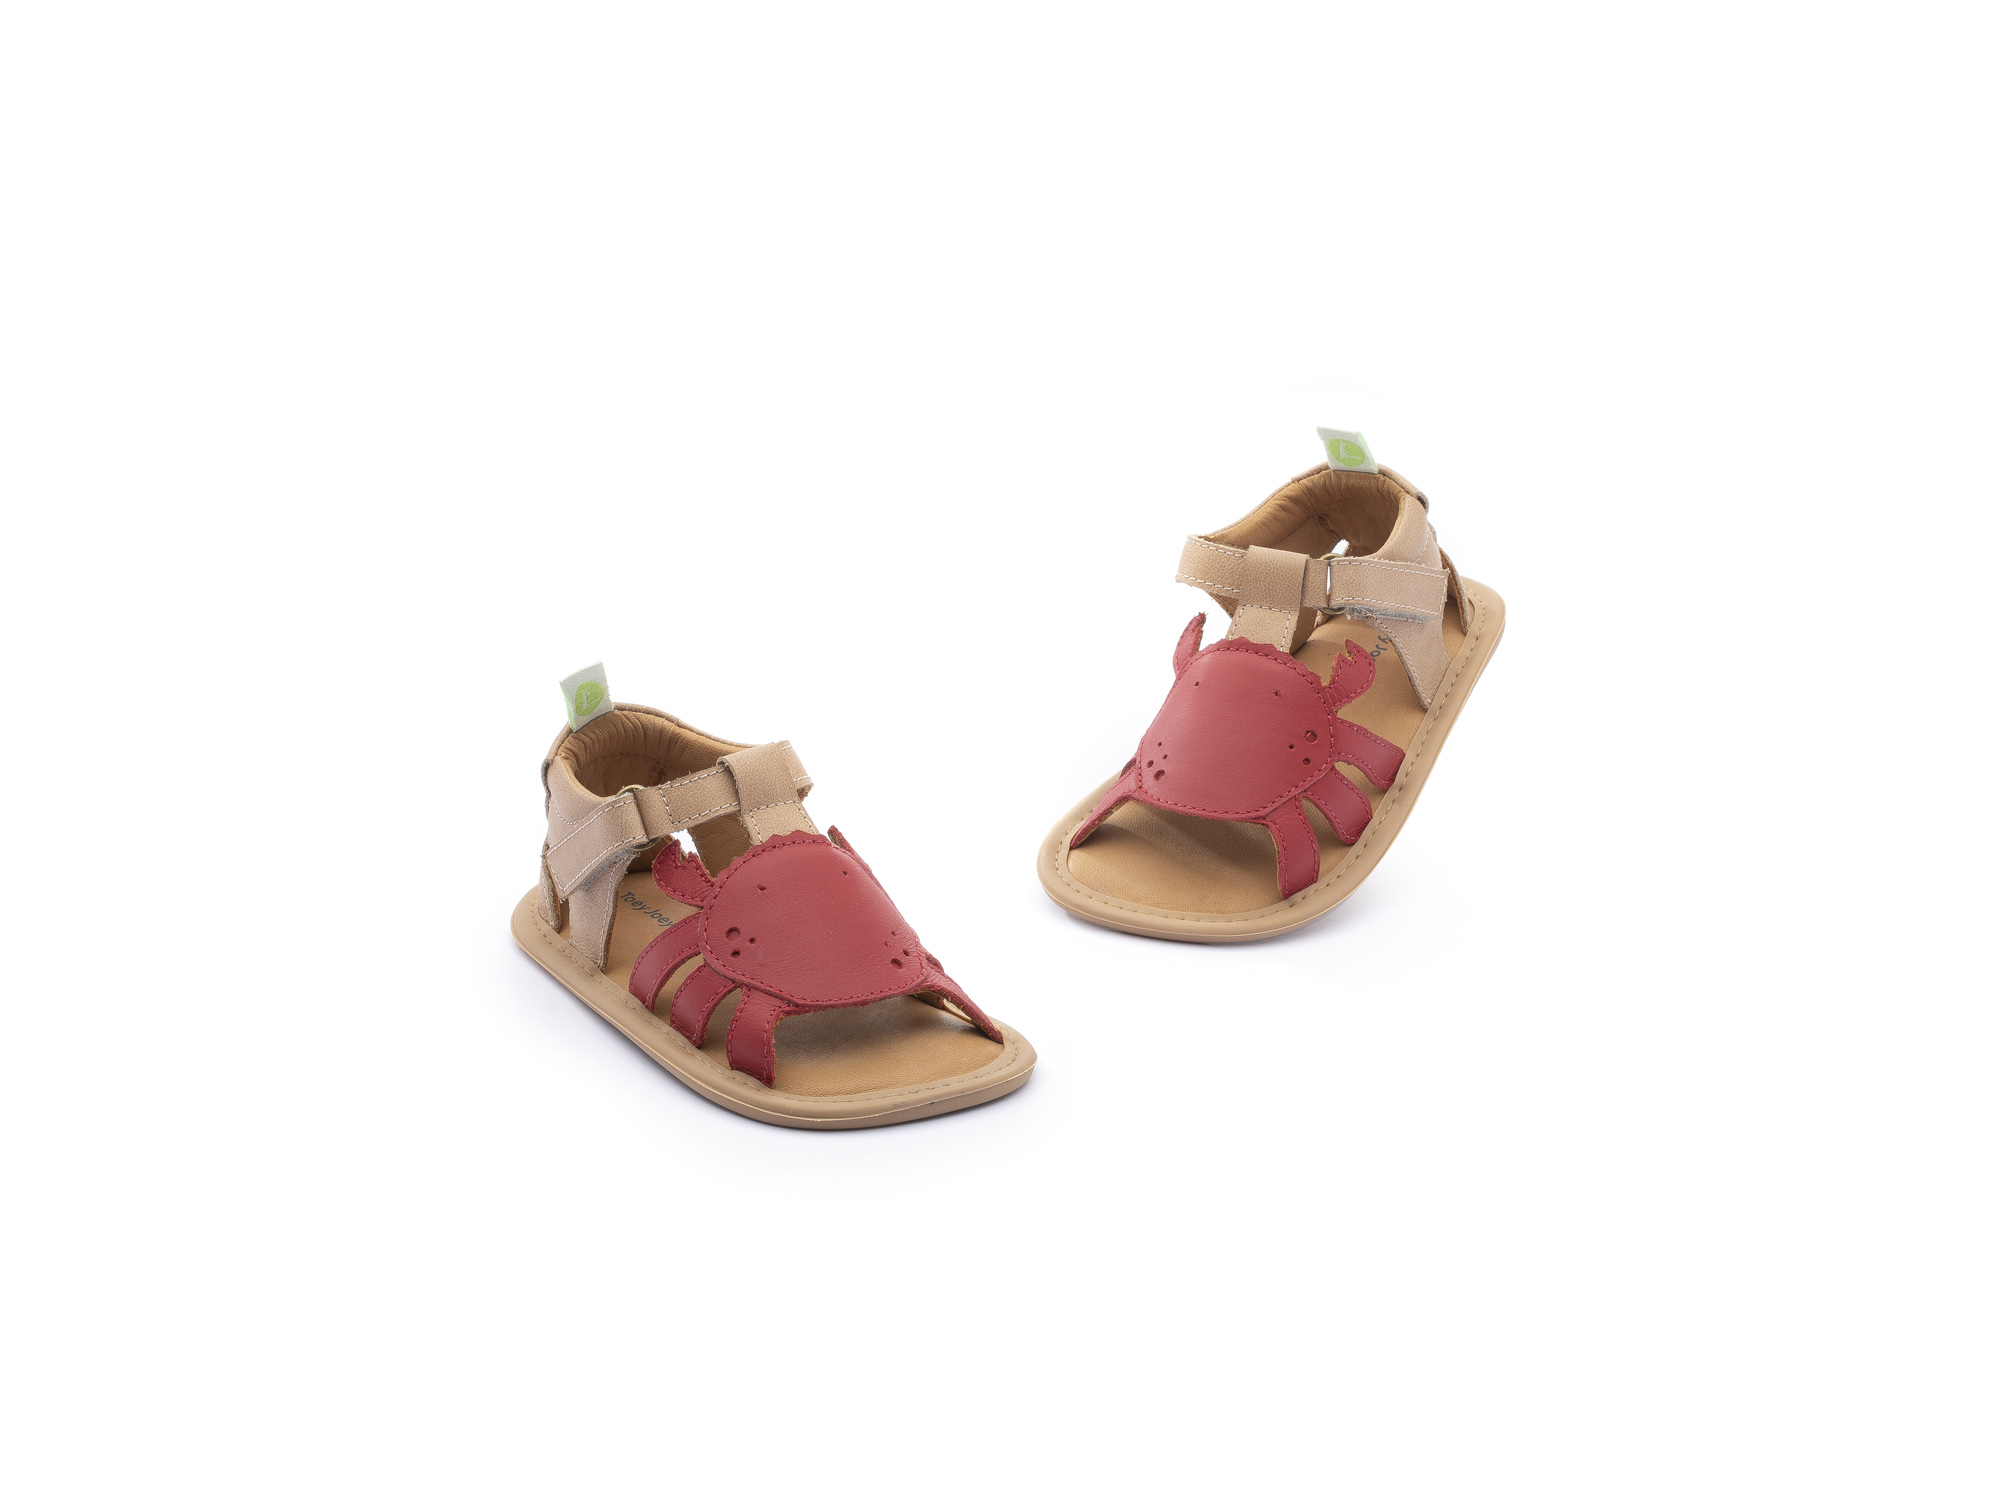 SIT & CRAWL Sandals for Boys Craby | Tip Toey Joey - Australia - 3